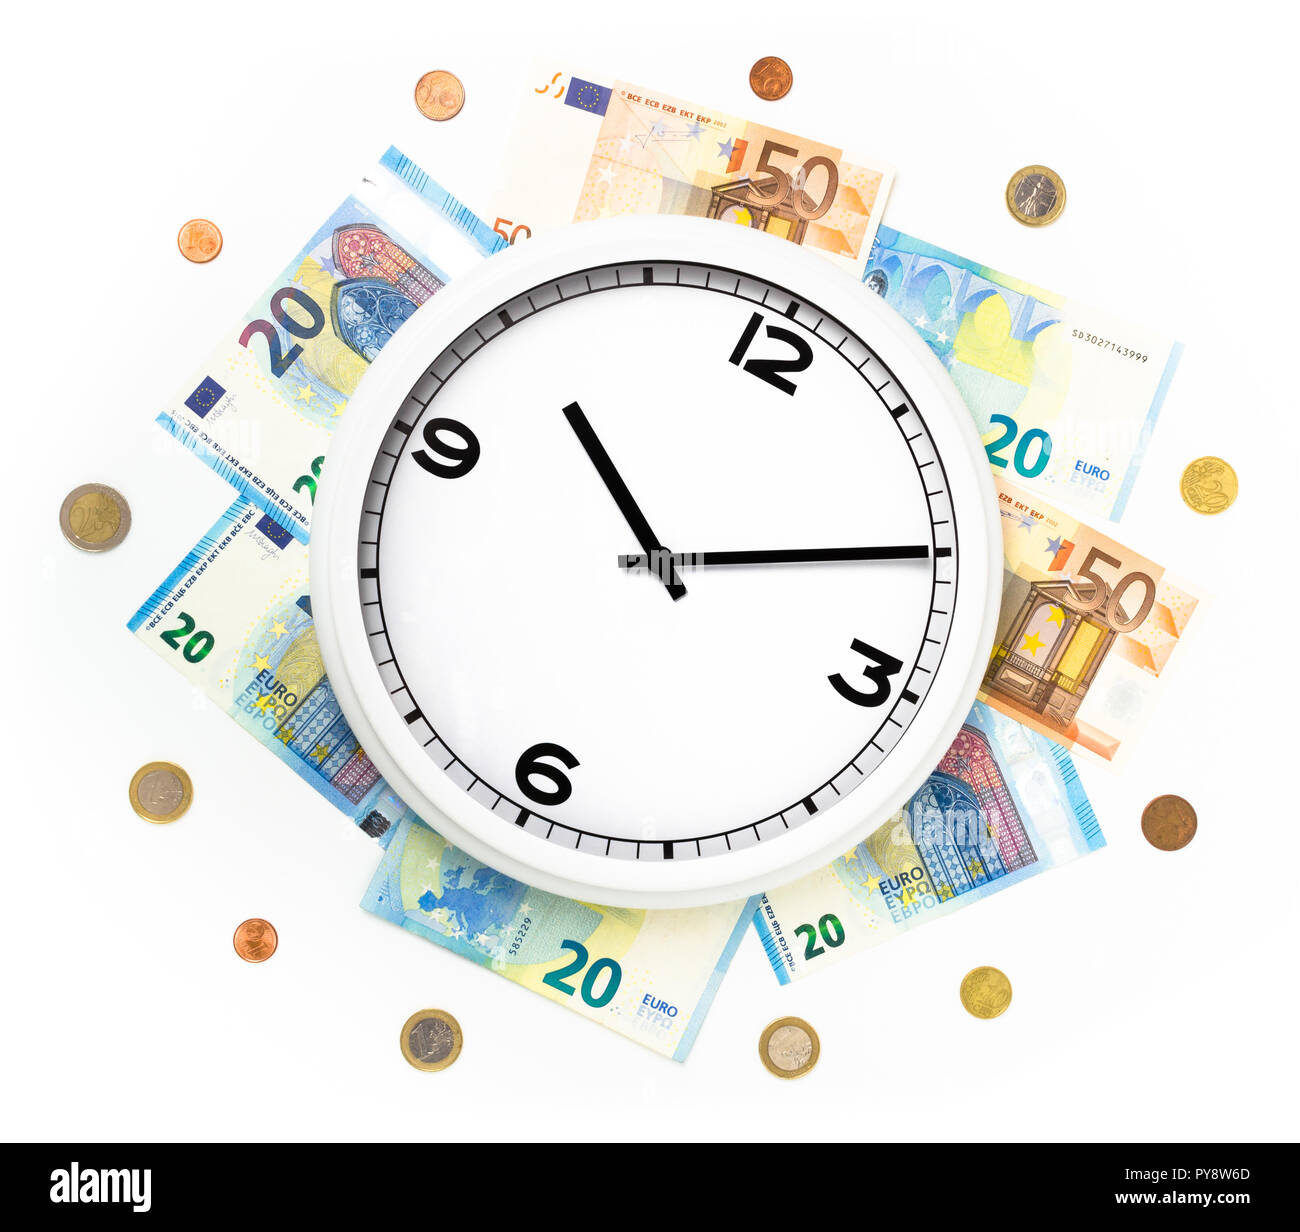 Clock surrounded by bills and euro coins. Concept of  time, money, work and life. Time is money. Stock Photo